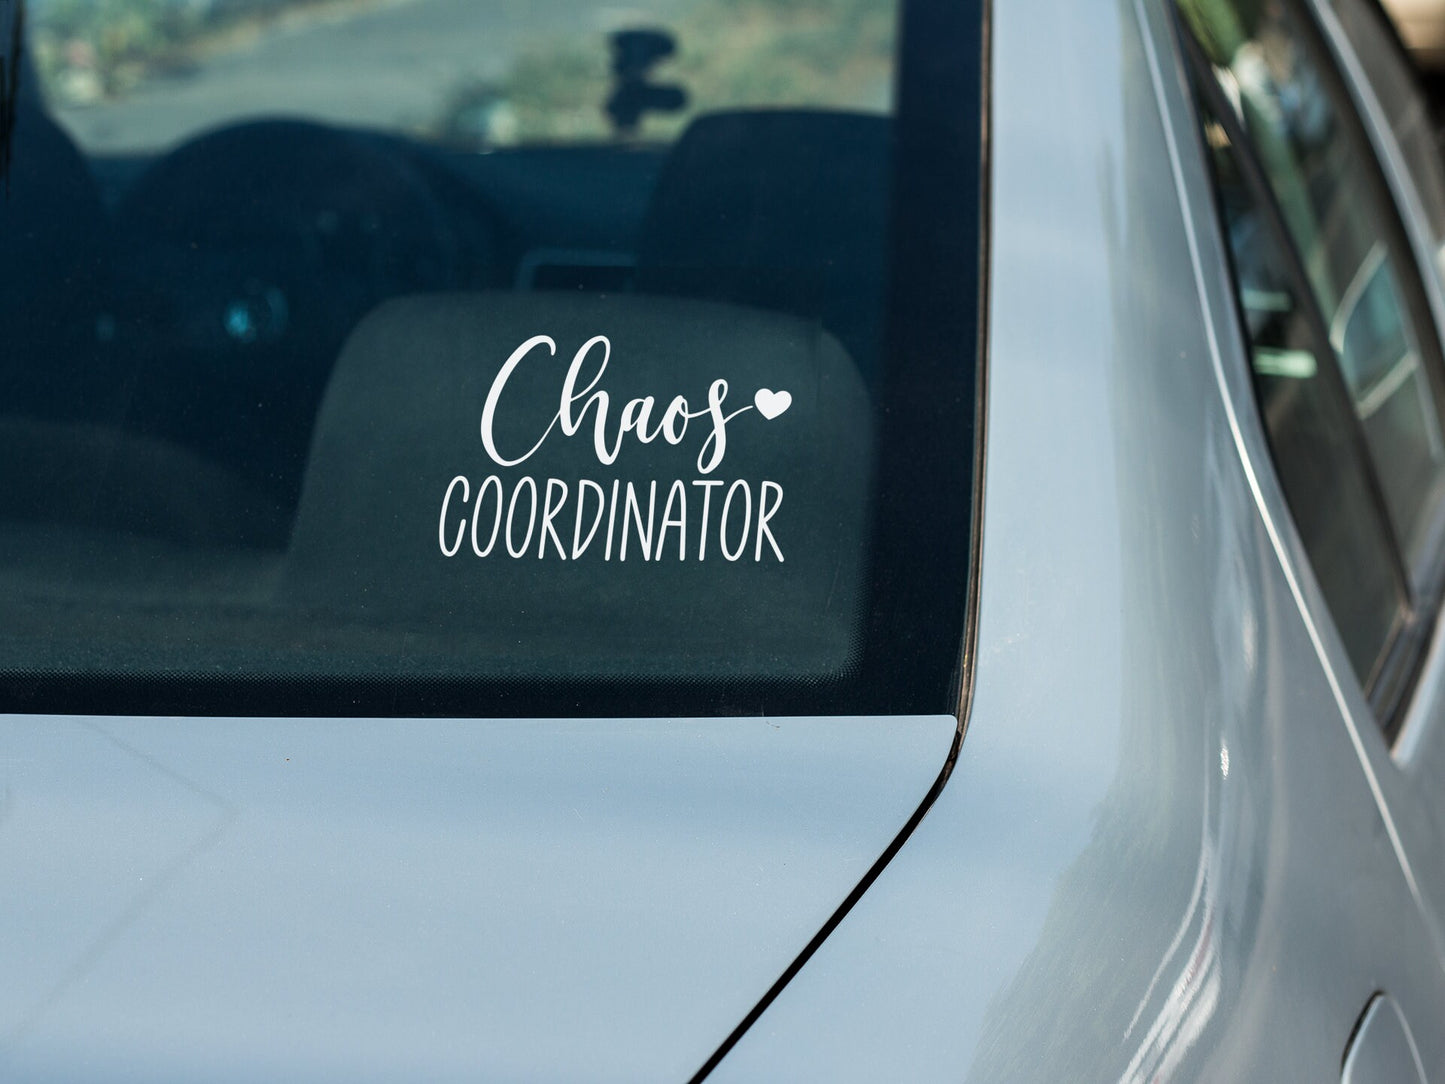 Chaos Coordinator Decal - Many Colors & Sizes